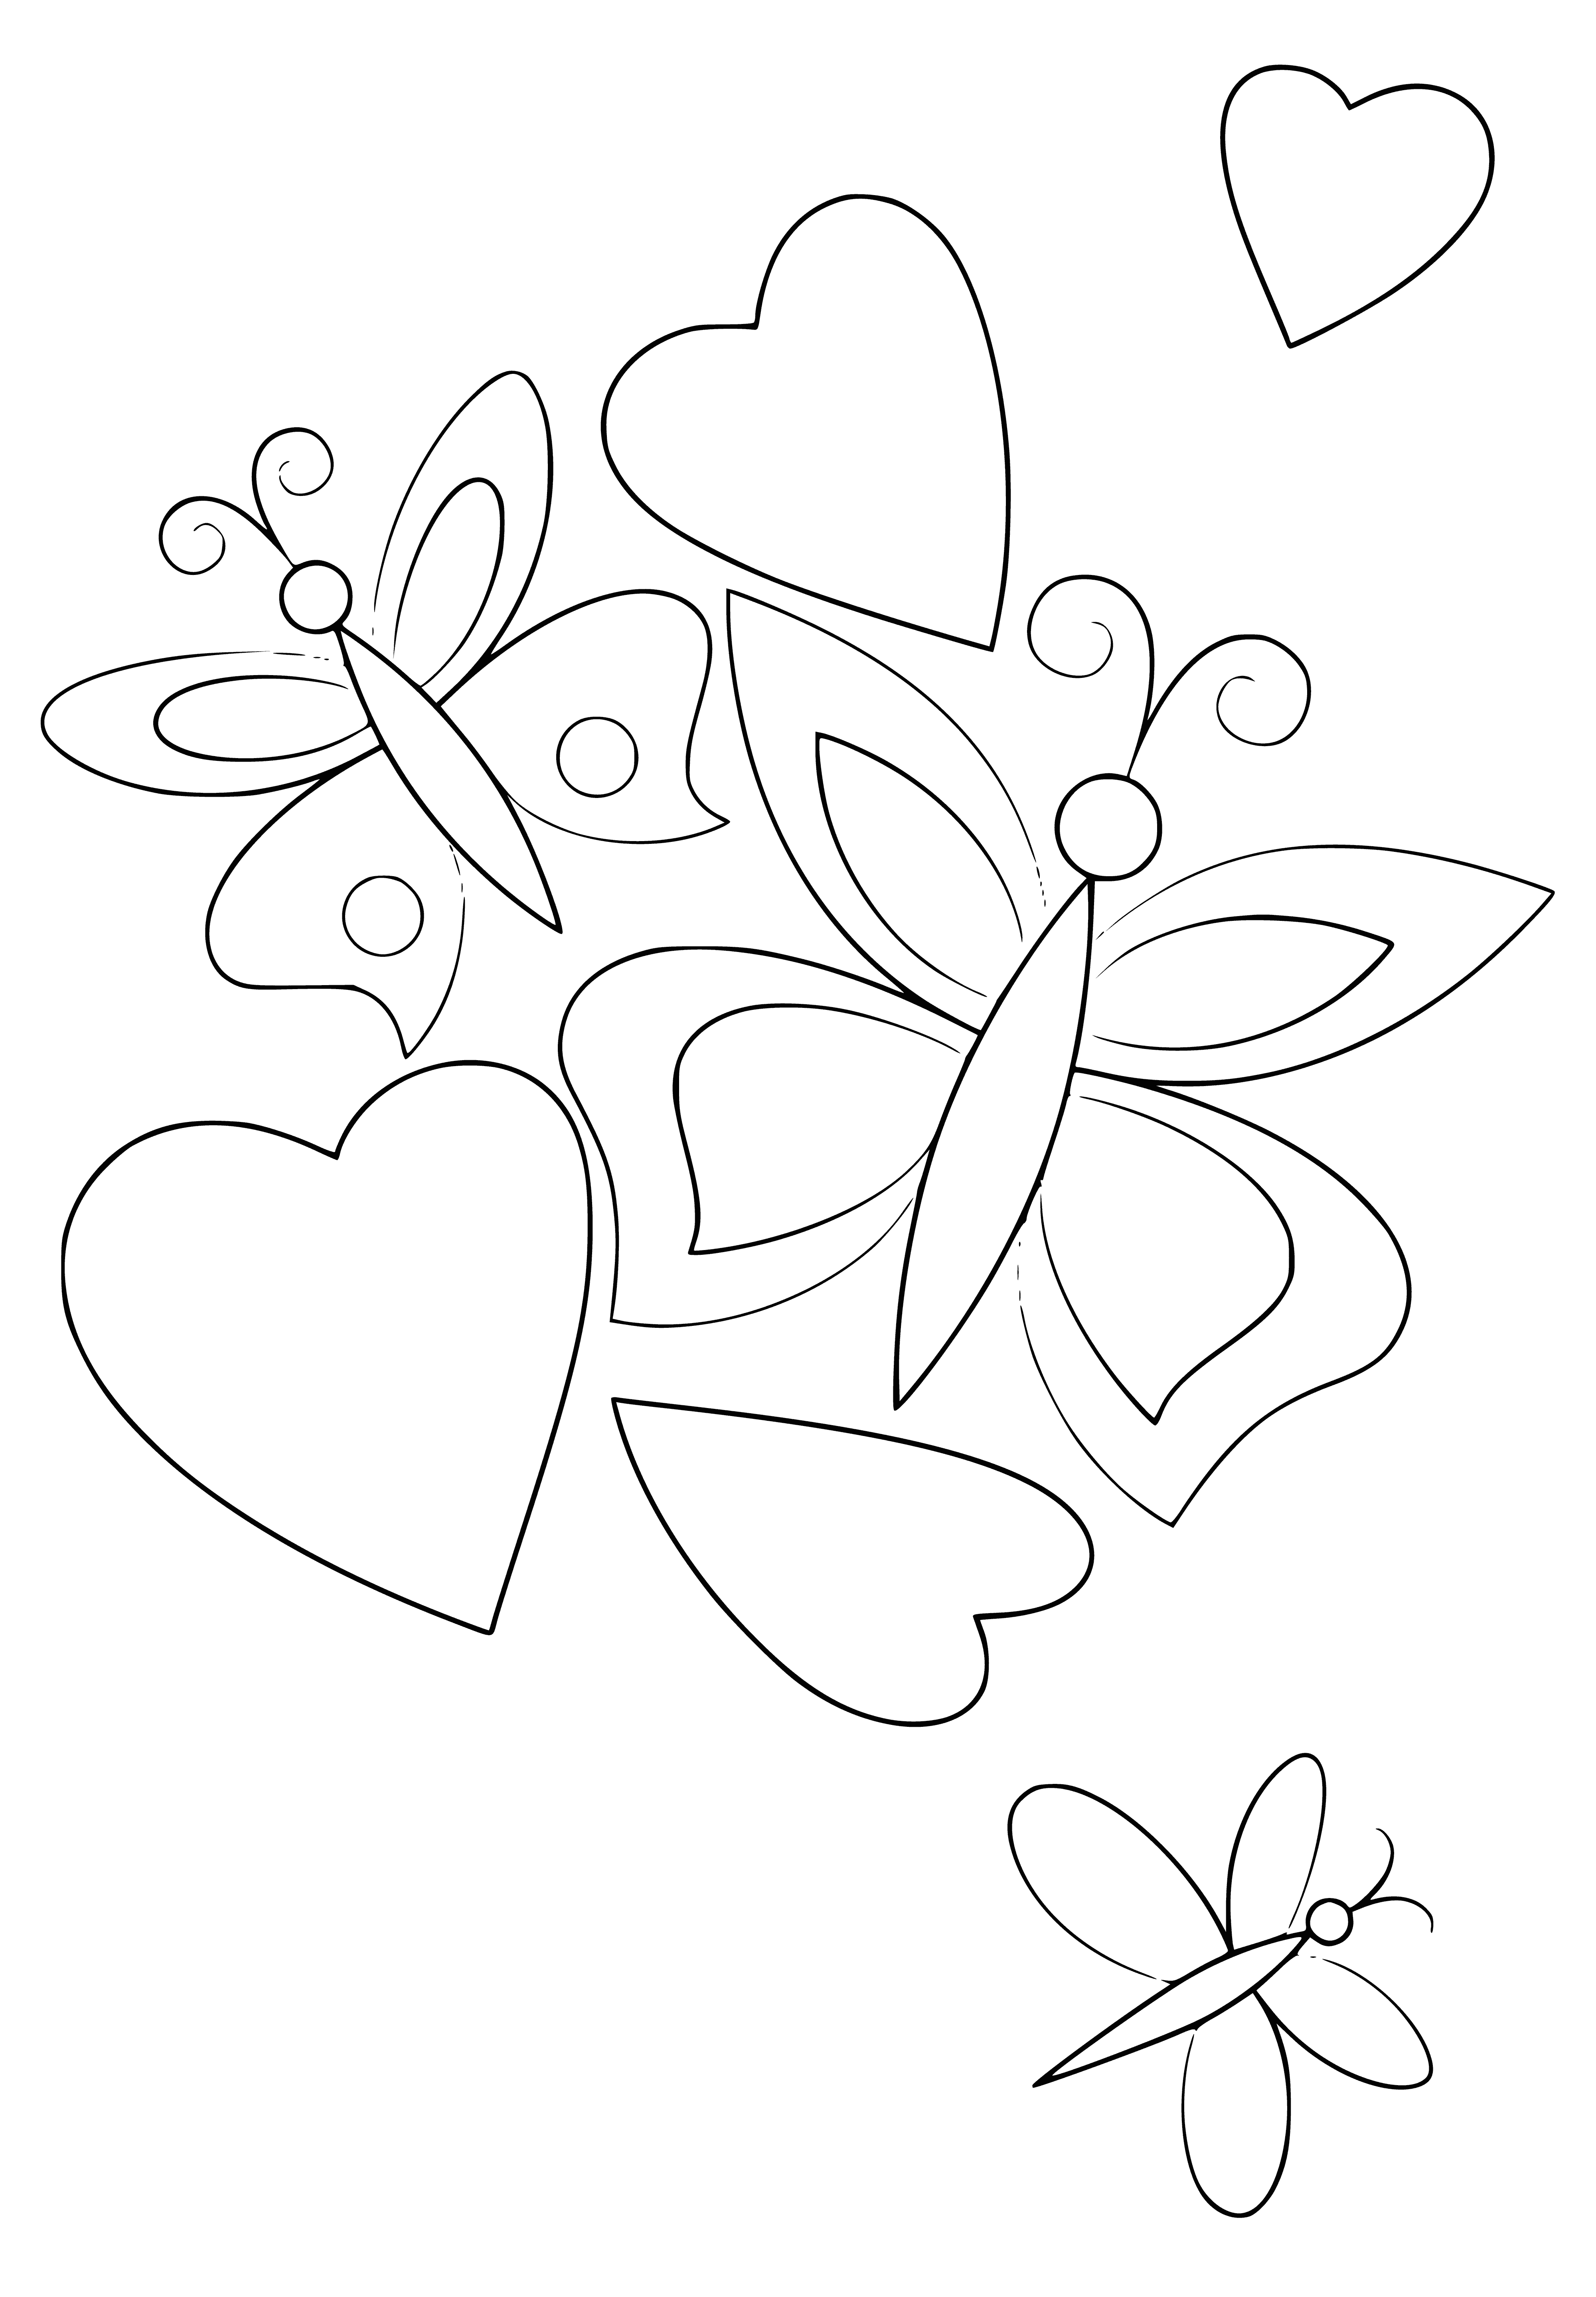 Heart and butterflies coloring page